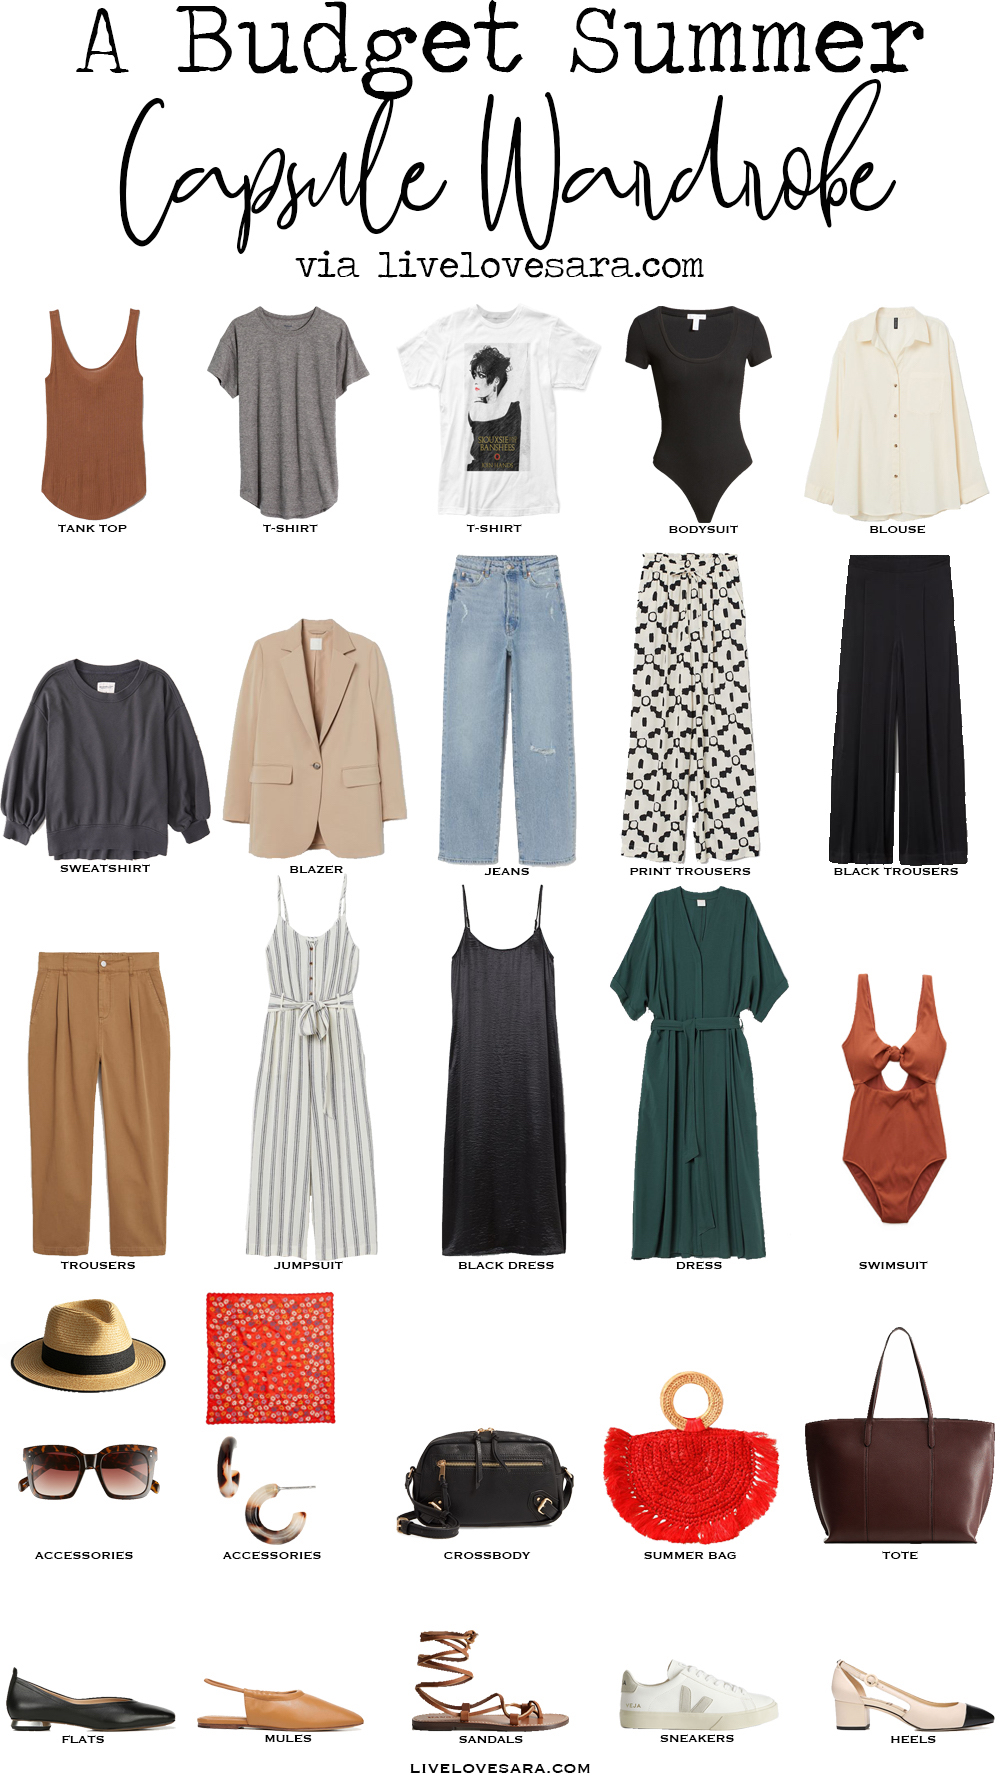 How to Build a Summer Capsule Wardrobe on a Budget | spring Wardrobe | spring Capsule Wardrobe | Summer Capsule Wardrobe | Budget capsule | capsule wardrobe on a Budget | Minimalist Capsule Wardrobe | Summer Capsule wardrobe | Budget Outfit Ideas | Budget Wardrobe | Neutral Outfit Ideas |